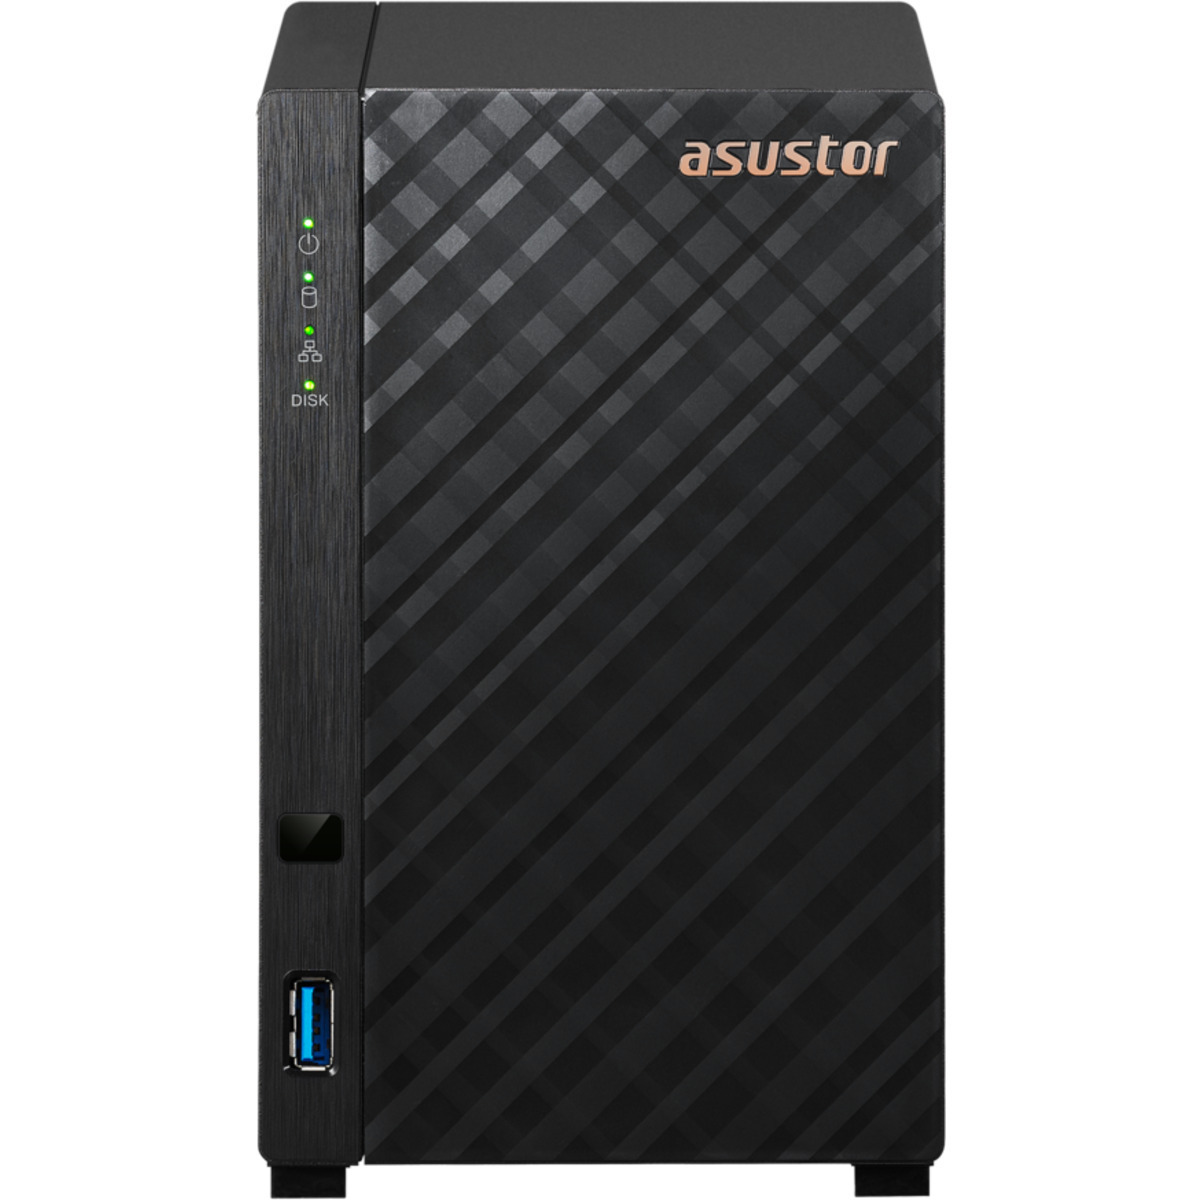 ASUSTOR DRIVESTOR 2 Lite AS1102TL 32tb 2-Bay Desktop Personal / Basic Home / Small Office NAS - Network Attached Storage Device 2x16tb Seagate IronWolf Pro ST16000NT001 3.5 7200rpm SATA 6Gb/s HDD NAS Class Drives Installed - Burn-In Tested - ON SALE DRIVESTOR 2 Lite AS1102TL